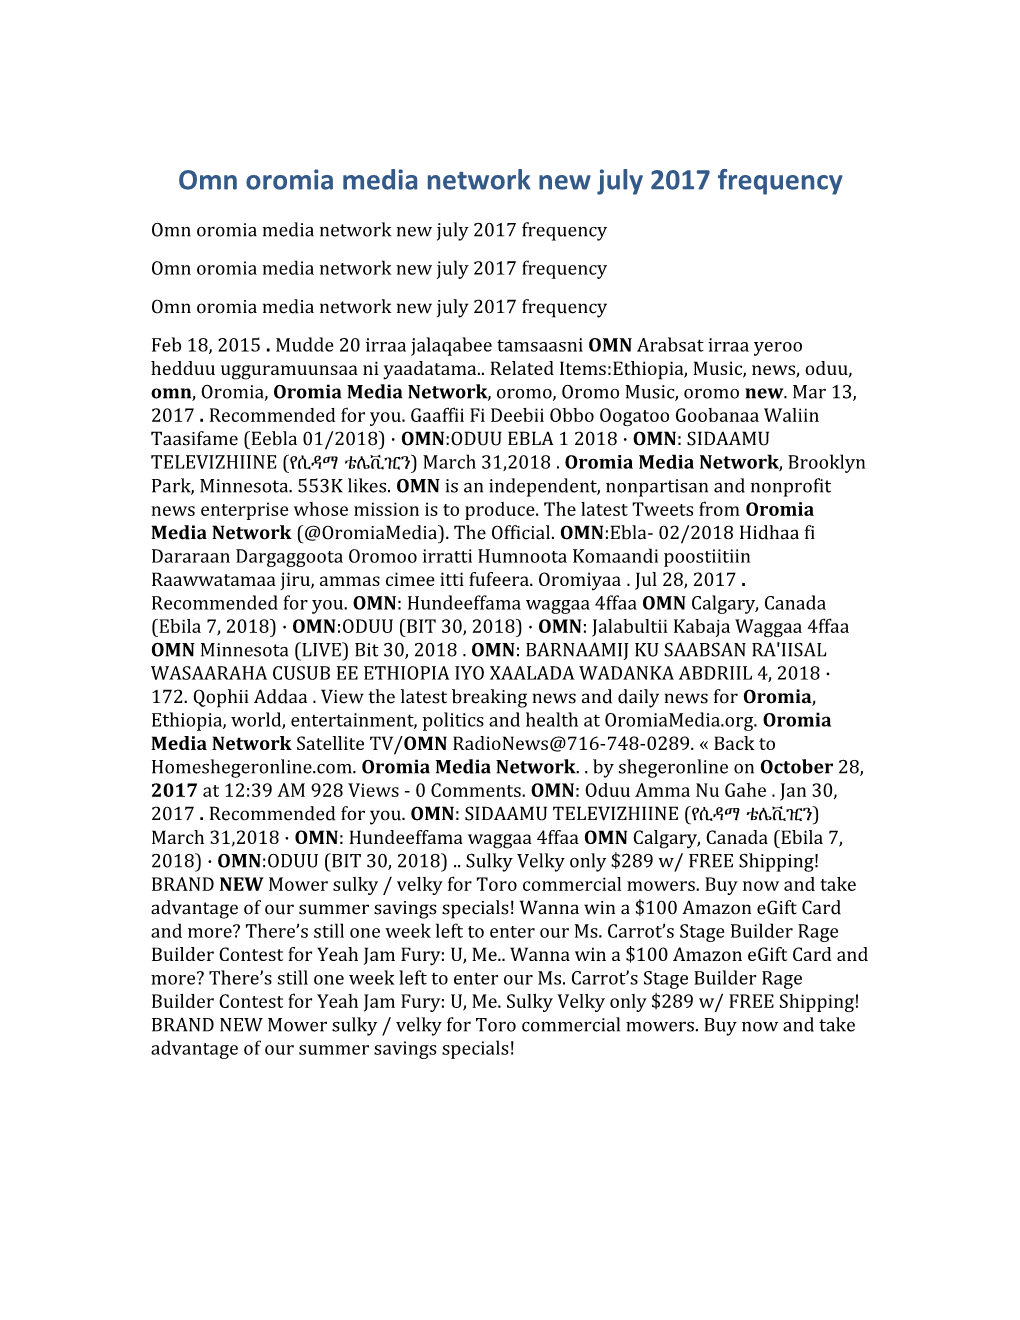 Omn Oromia Media Network New July 2017 Frequency